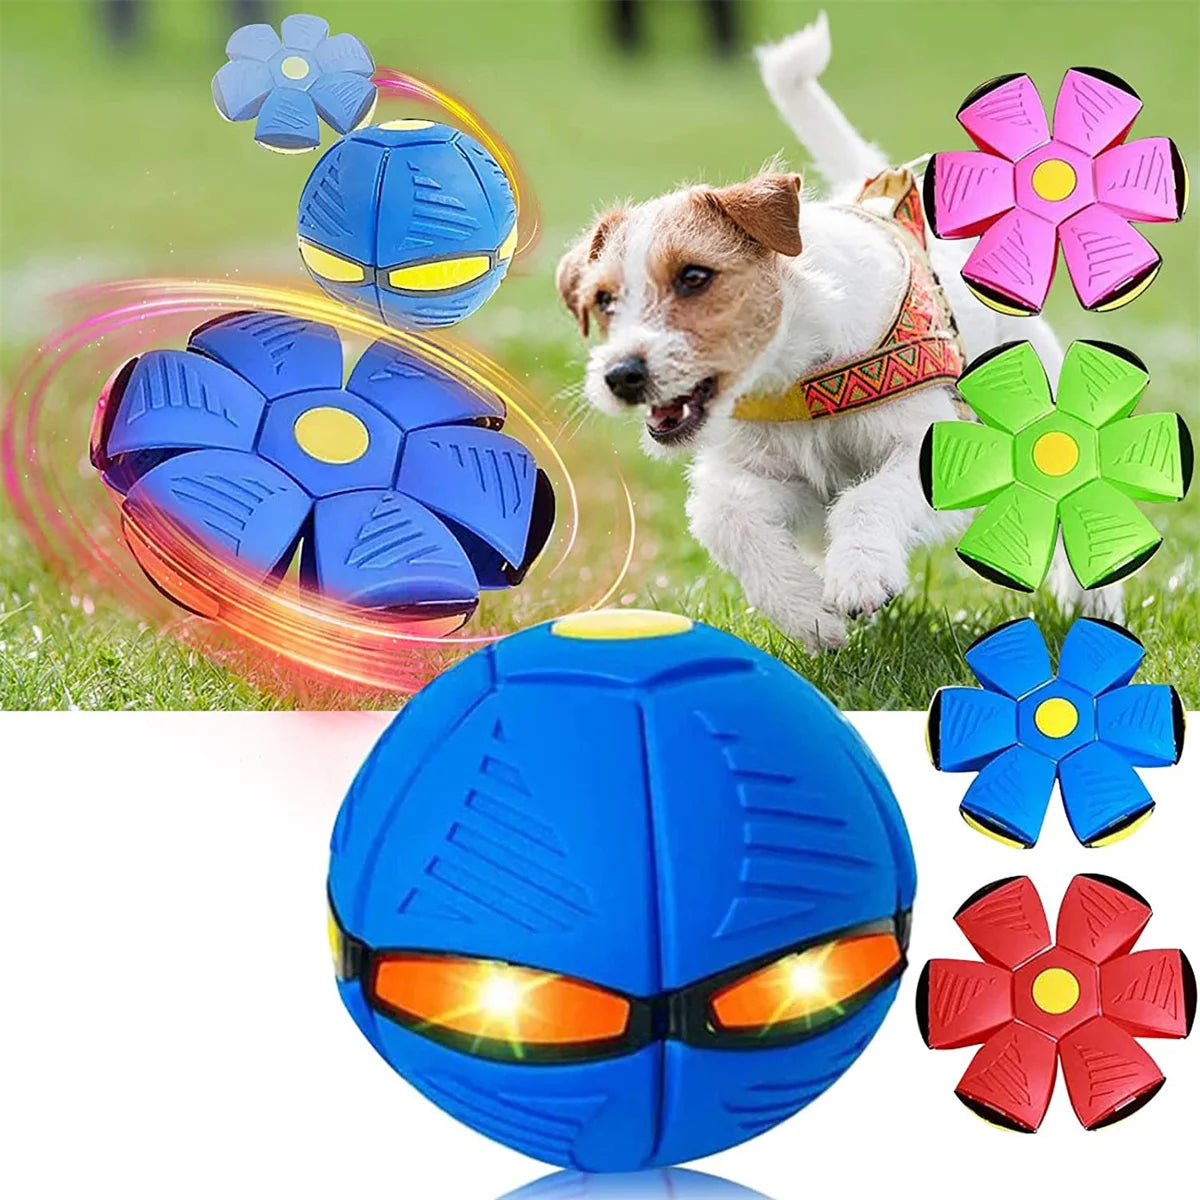 UFO Magic Deformation Ball: Interactive and Transformative Pet Toy